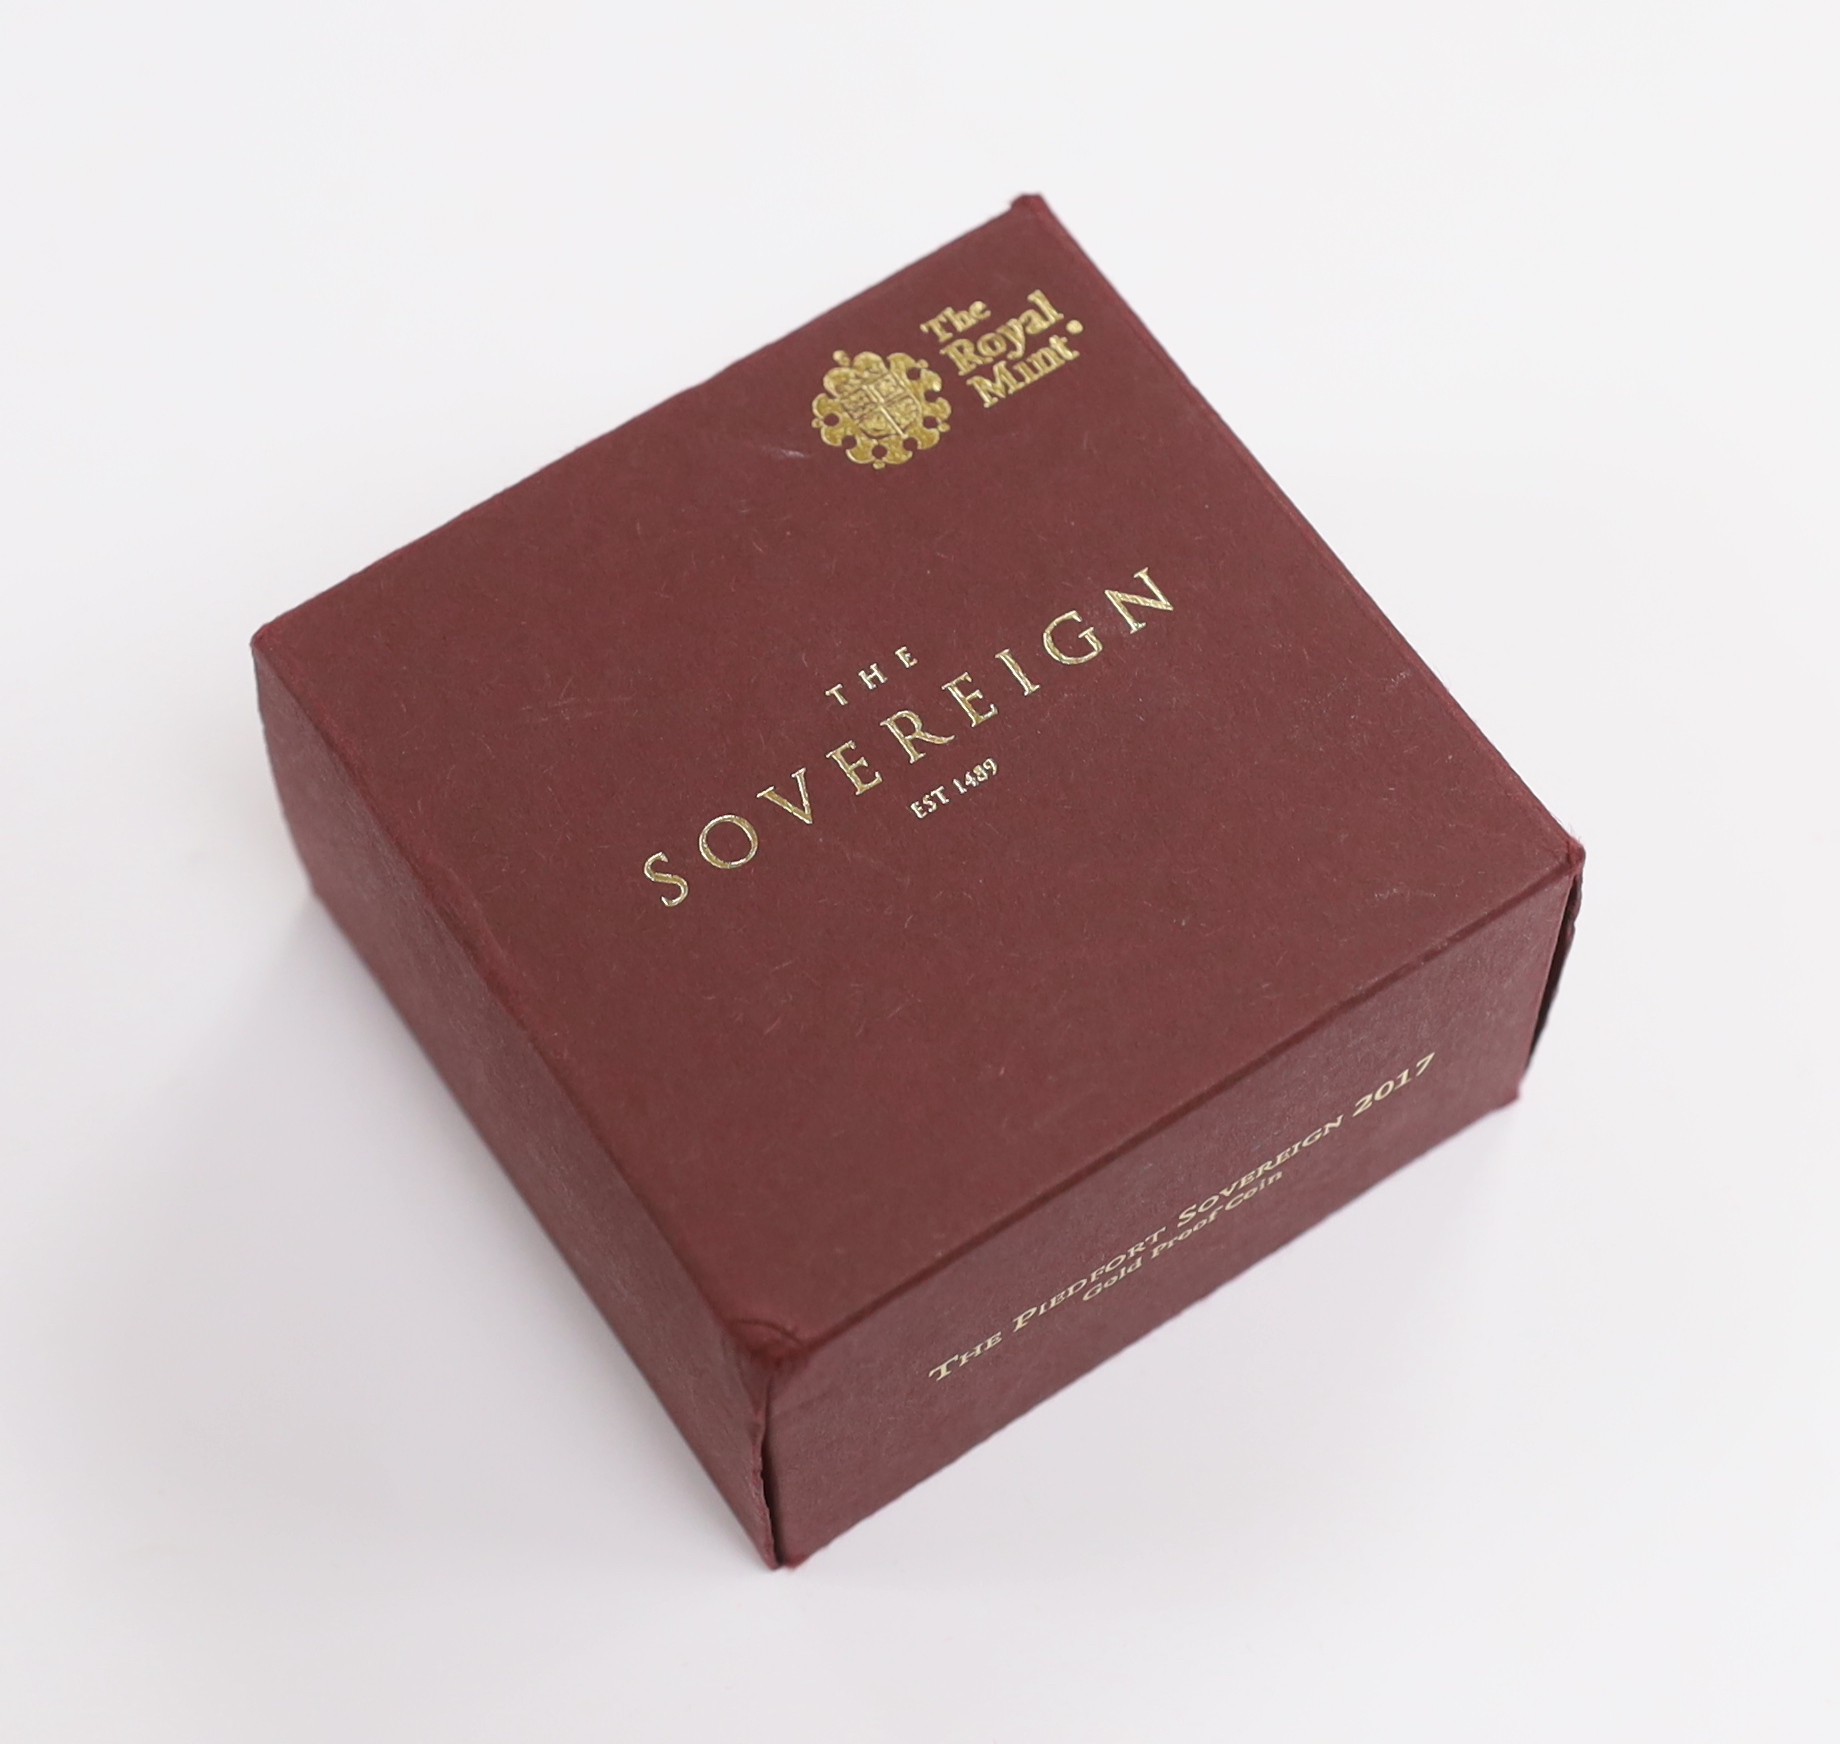 British gold coins - UK Royal Mint Piedfort proof gold sovereign, 2017, in case of issue, certificate number 1844 of a limited edition of 3500